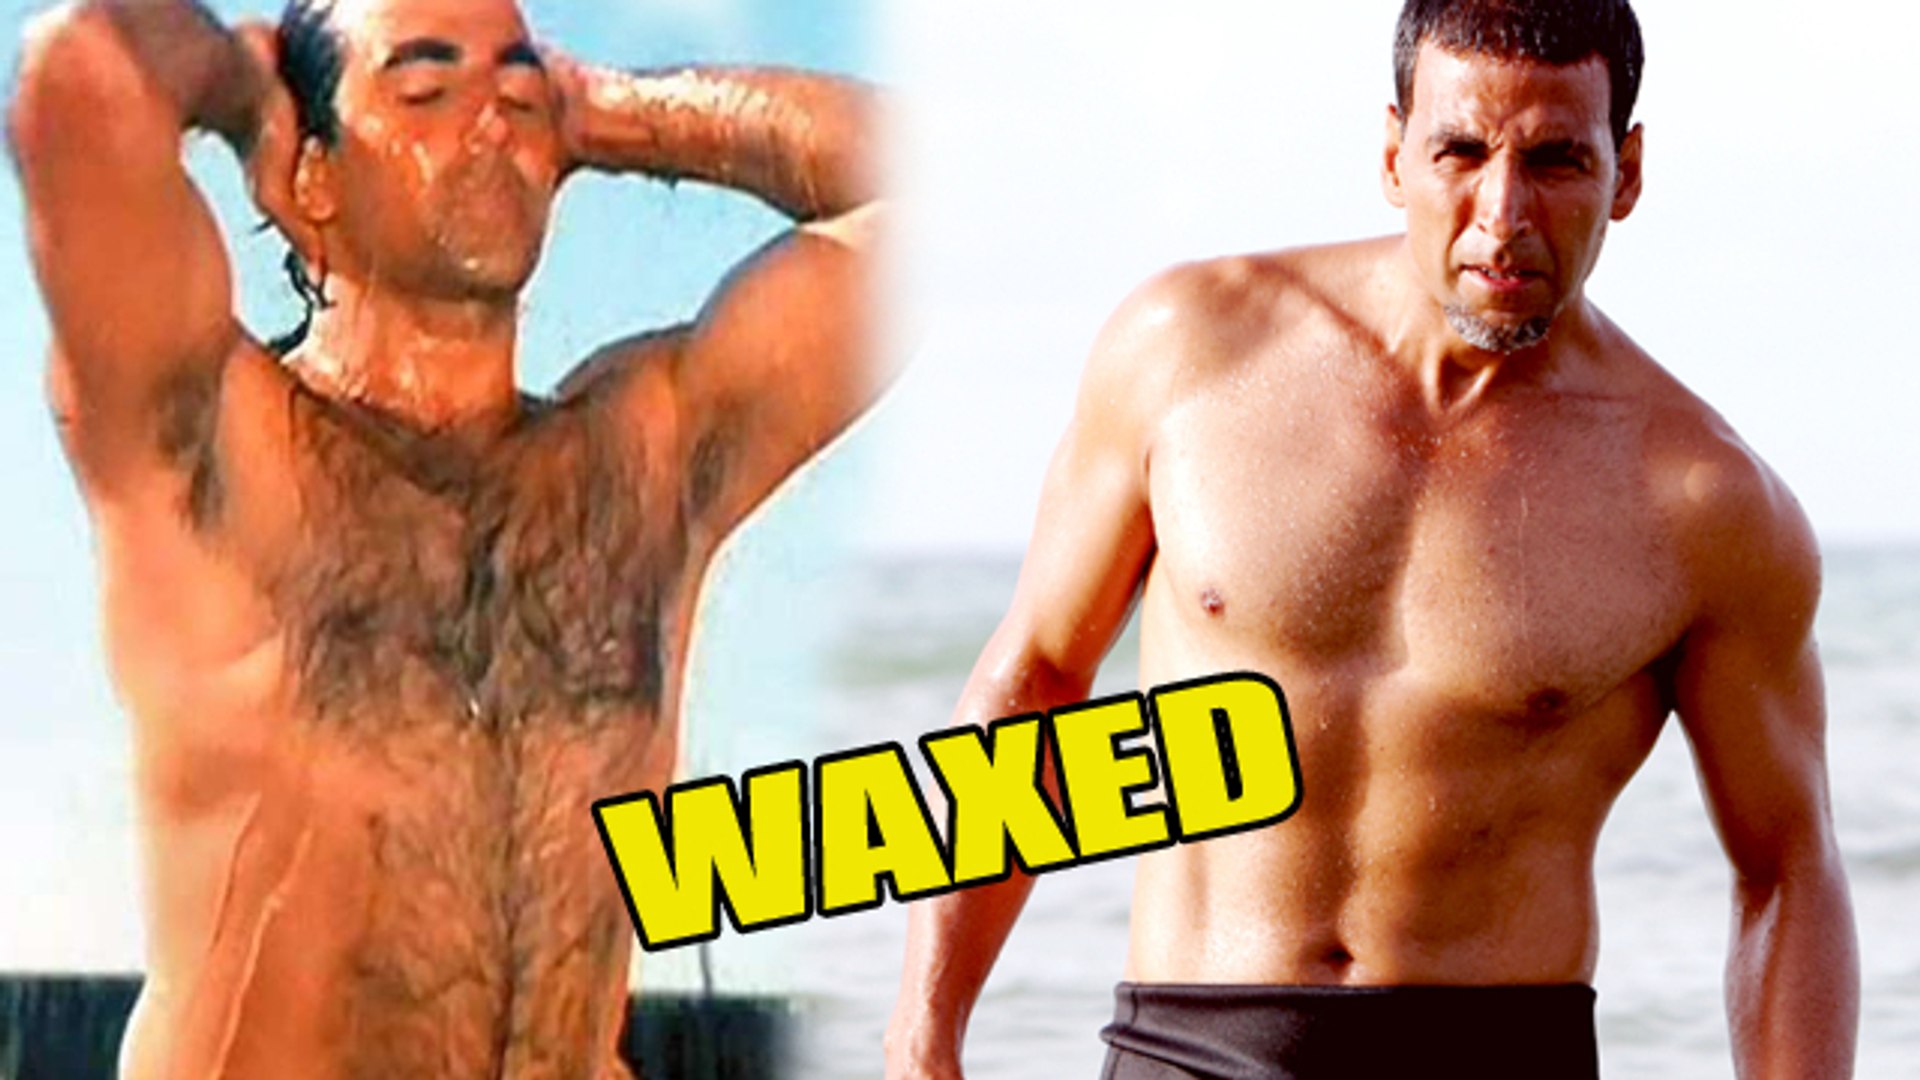 Watch Bollywood Hairy Actors Who Waxed Their Chests Video Dailymotion Anil kapoor...